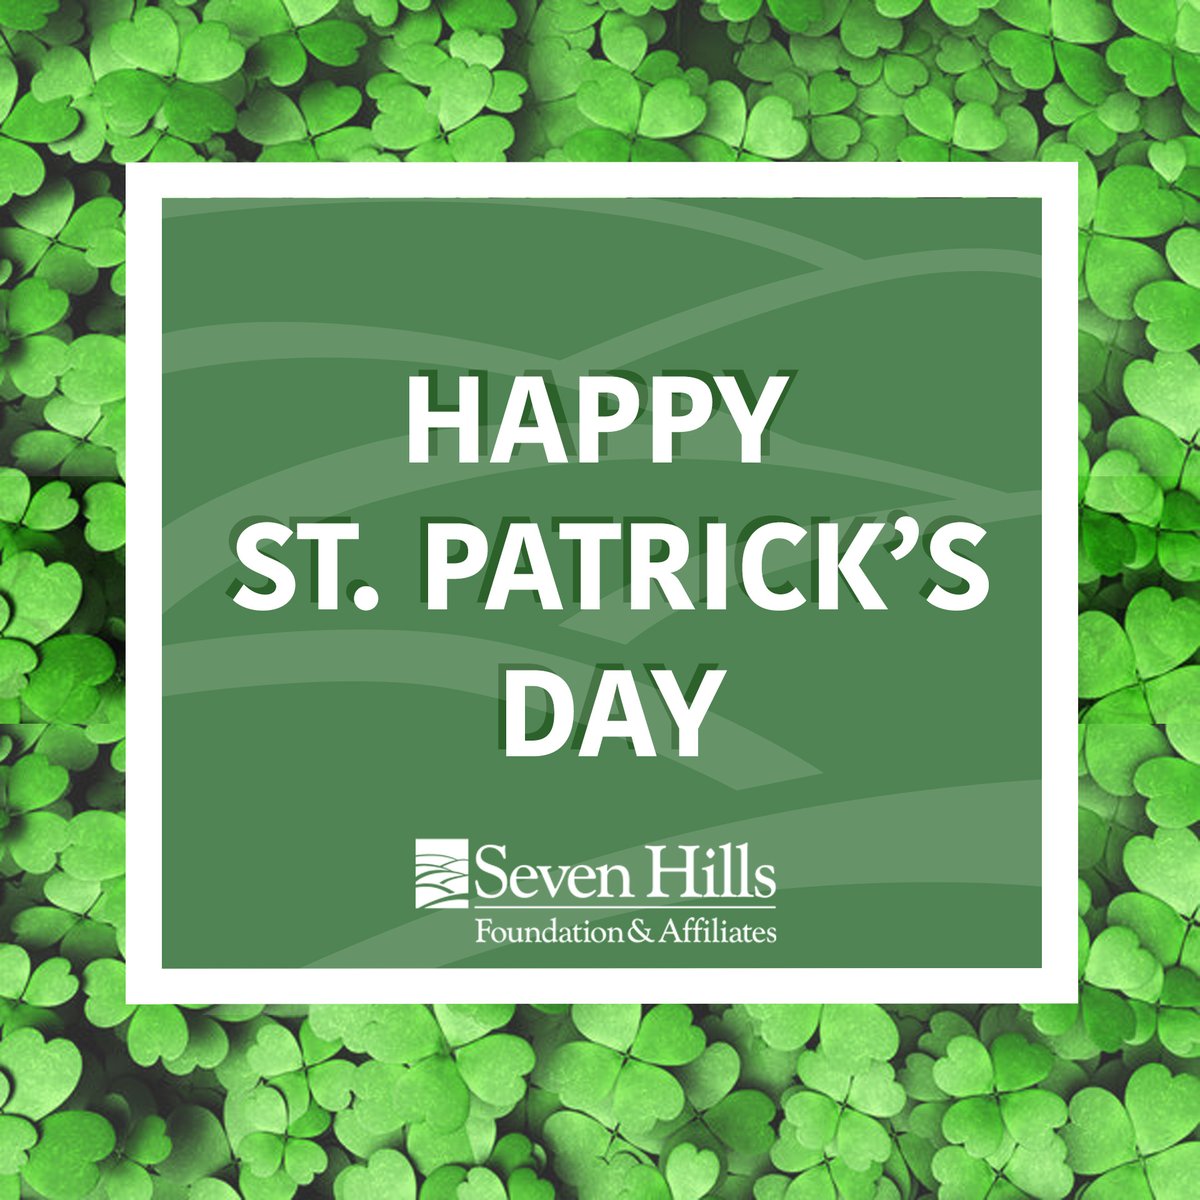 Happy St. Patrick’s Day from all of us at Seven Hills Foundation & Affiliates! Today, we're reminded of the importance of community and support, so let’s spread a little extra luck and kindness to all.